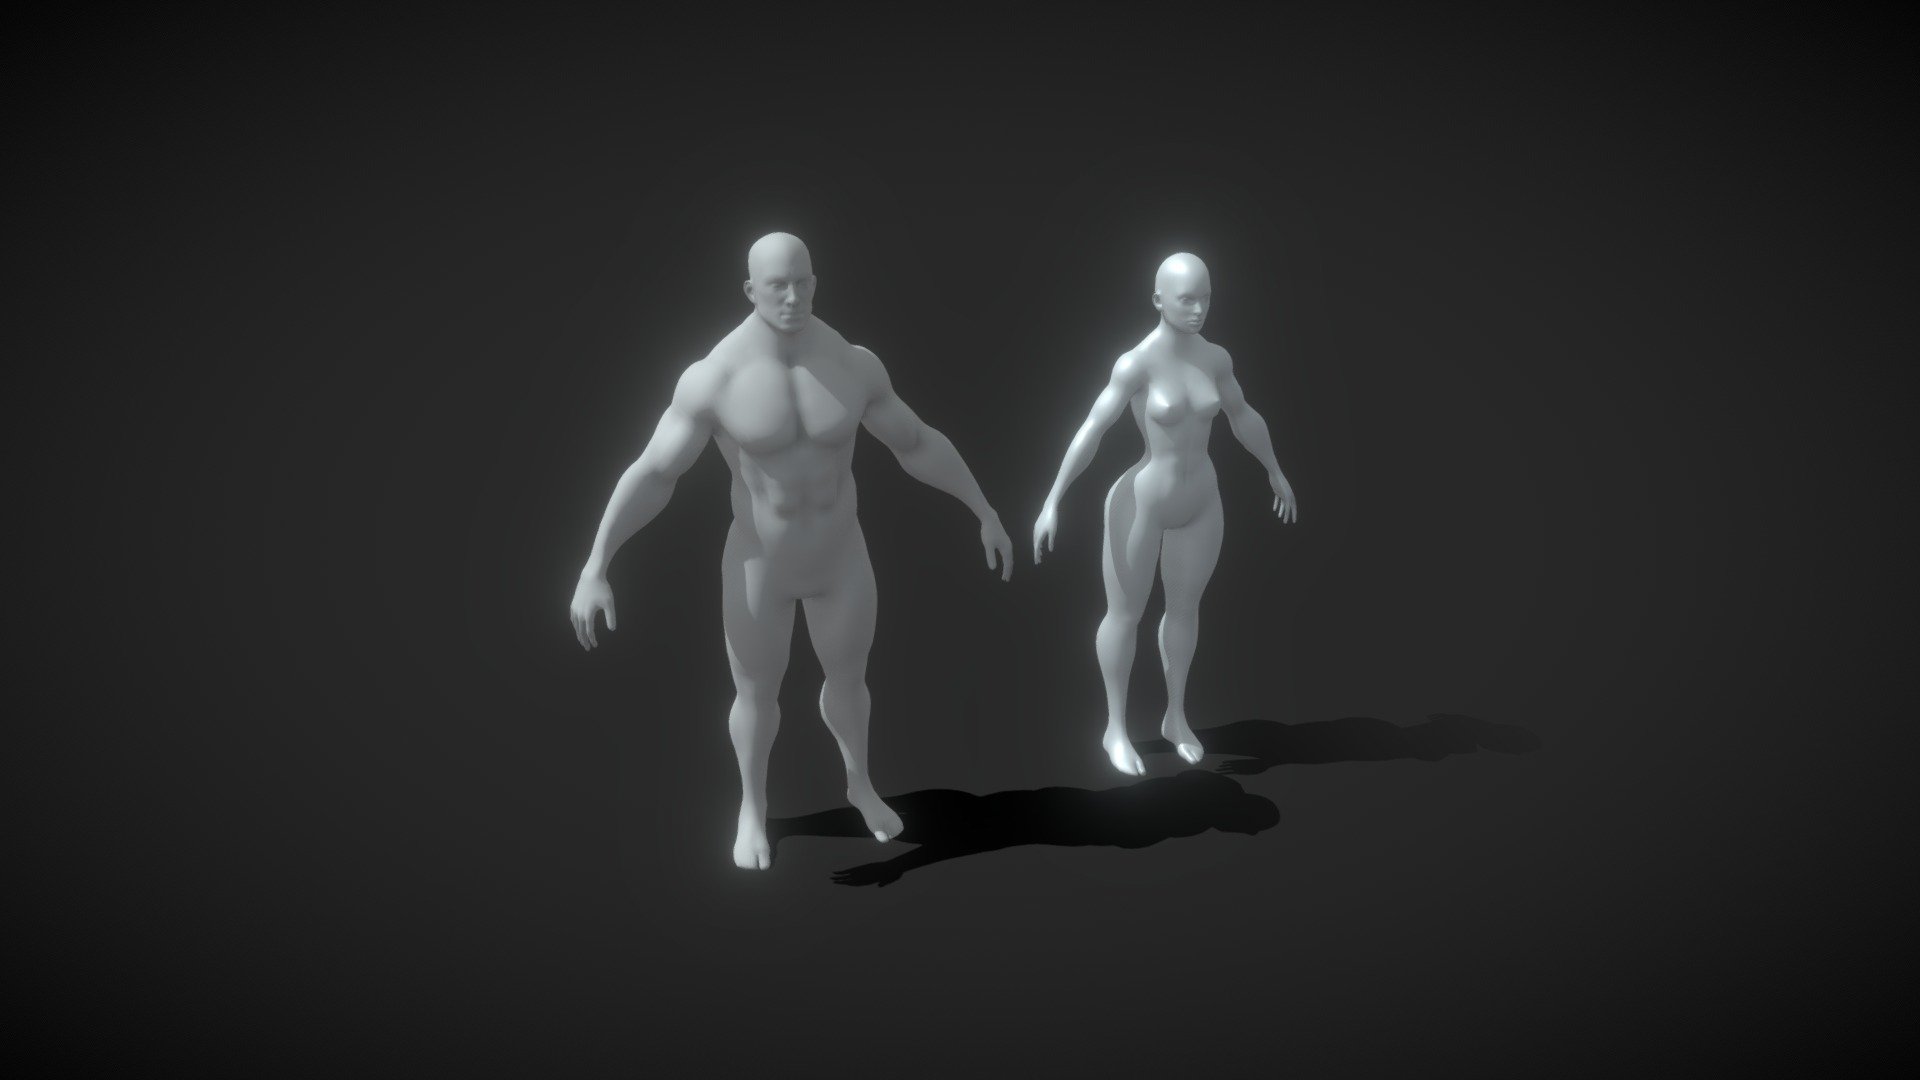 Superhero Muscular Human Male Female Body Base Mesh 3D Model 10k Polygons consists of 2 base mesh models:  




Superhero Male Body Base Mesh 3D Model 10k Polygons (10308 Polygons, 10112 Vertices)  

Superhero Female Body Base Mesh 3D Model 10k Polygons (10068 Polygons, 9617 Vertices)  

Technical details:  




File formats included in the package are: FBX, OBJ, GLB, ABC, DAE, PLY, STL, BLEND, gLTF (generated), USDZ (generated)  

Native software file format: BLEND  

Polygons: 20,376 (around 10k per model)  

Vertices: 19,729 (around 10k per model)  

You can buy any of them as a single model, or save 25% if you buy this pack 3d model